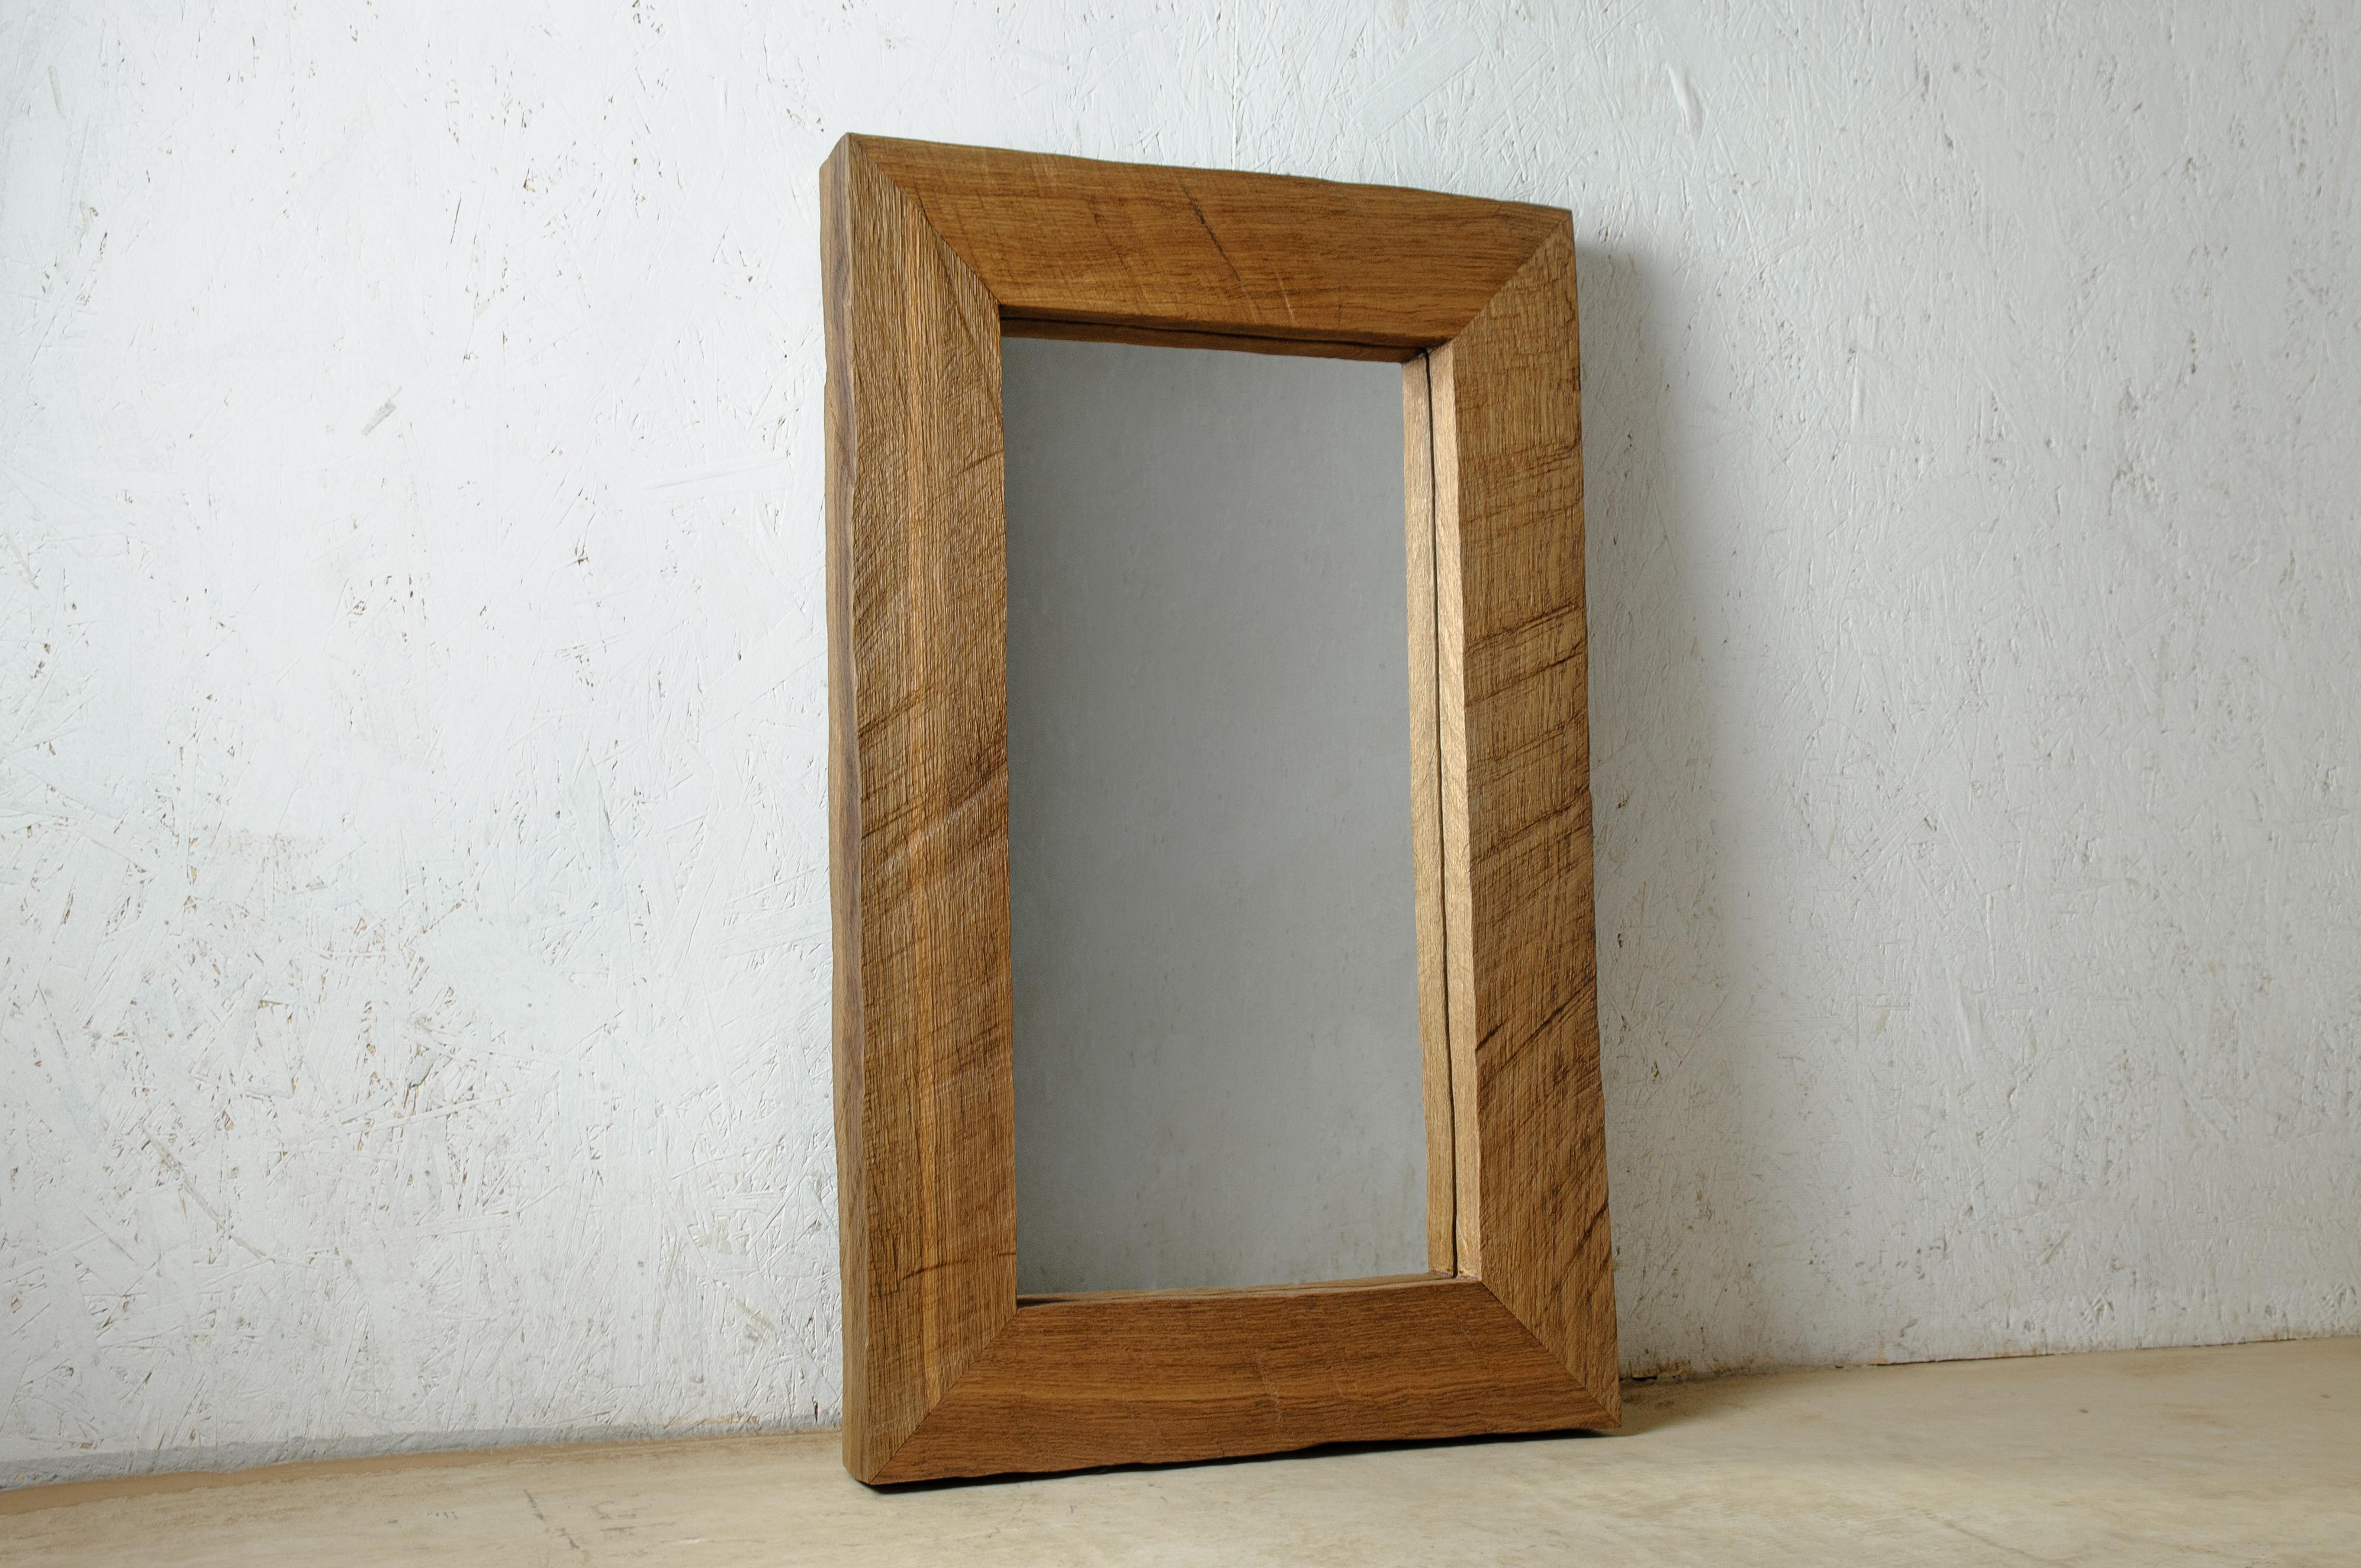 Wall mirror in solid oak (+ linseed oil)
Measures: 74 x 53 x 10 cm

SÓHA design studio conceives and produces furniture design and decorative objects in solid oak in an authentic style. Inspiration to create all these items comes from the Russian